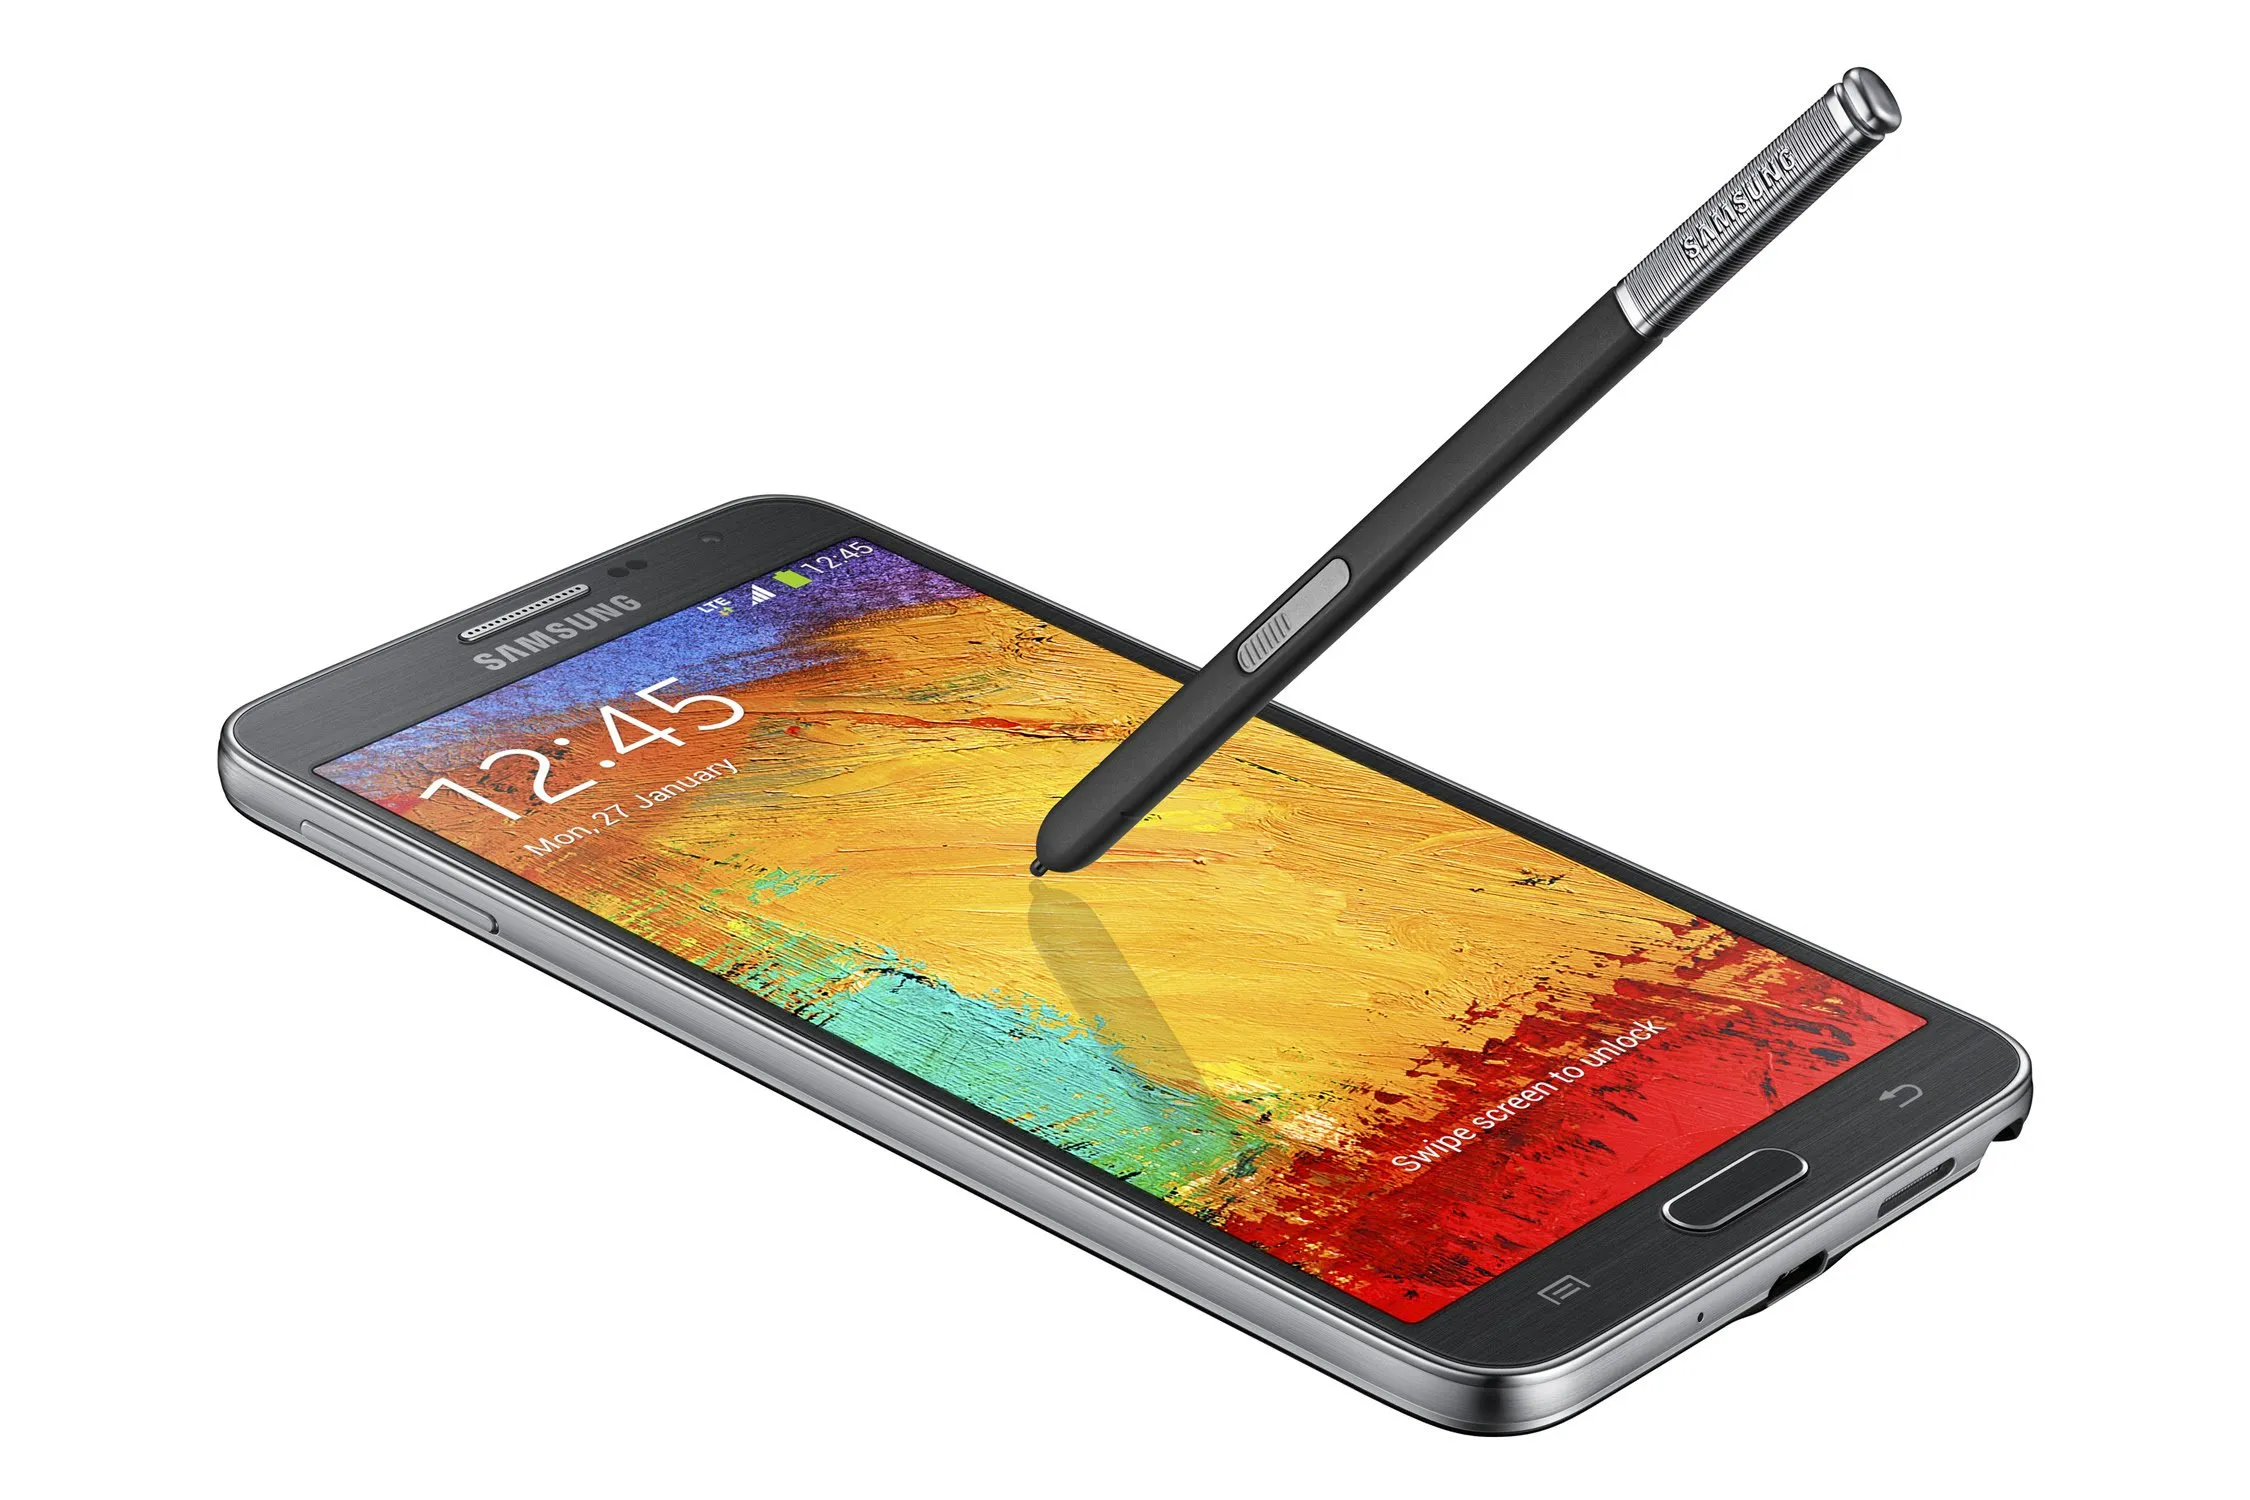 After a system update, the Samsung Galaxy Note 3 Neo does not vibrate.